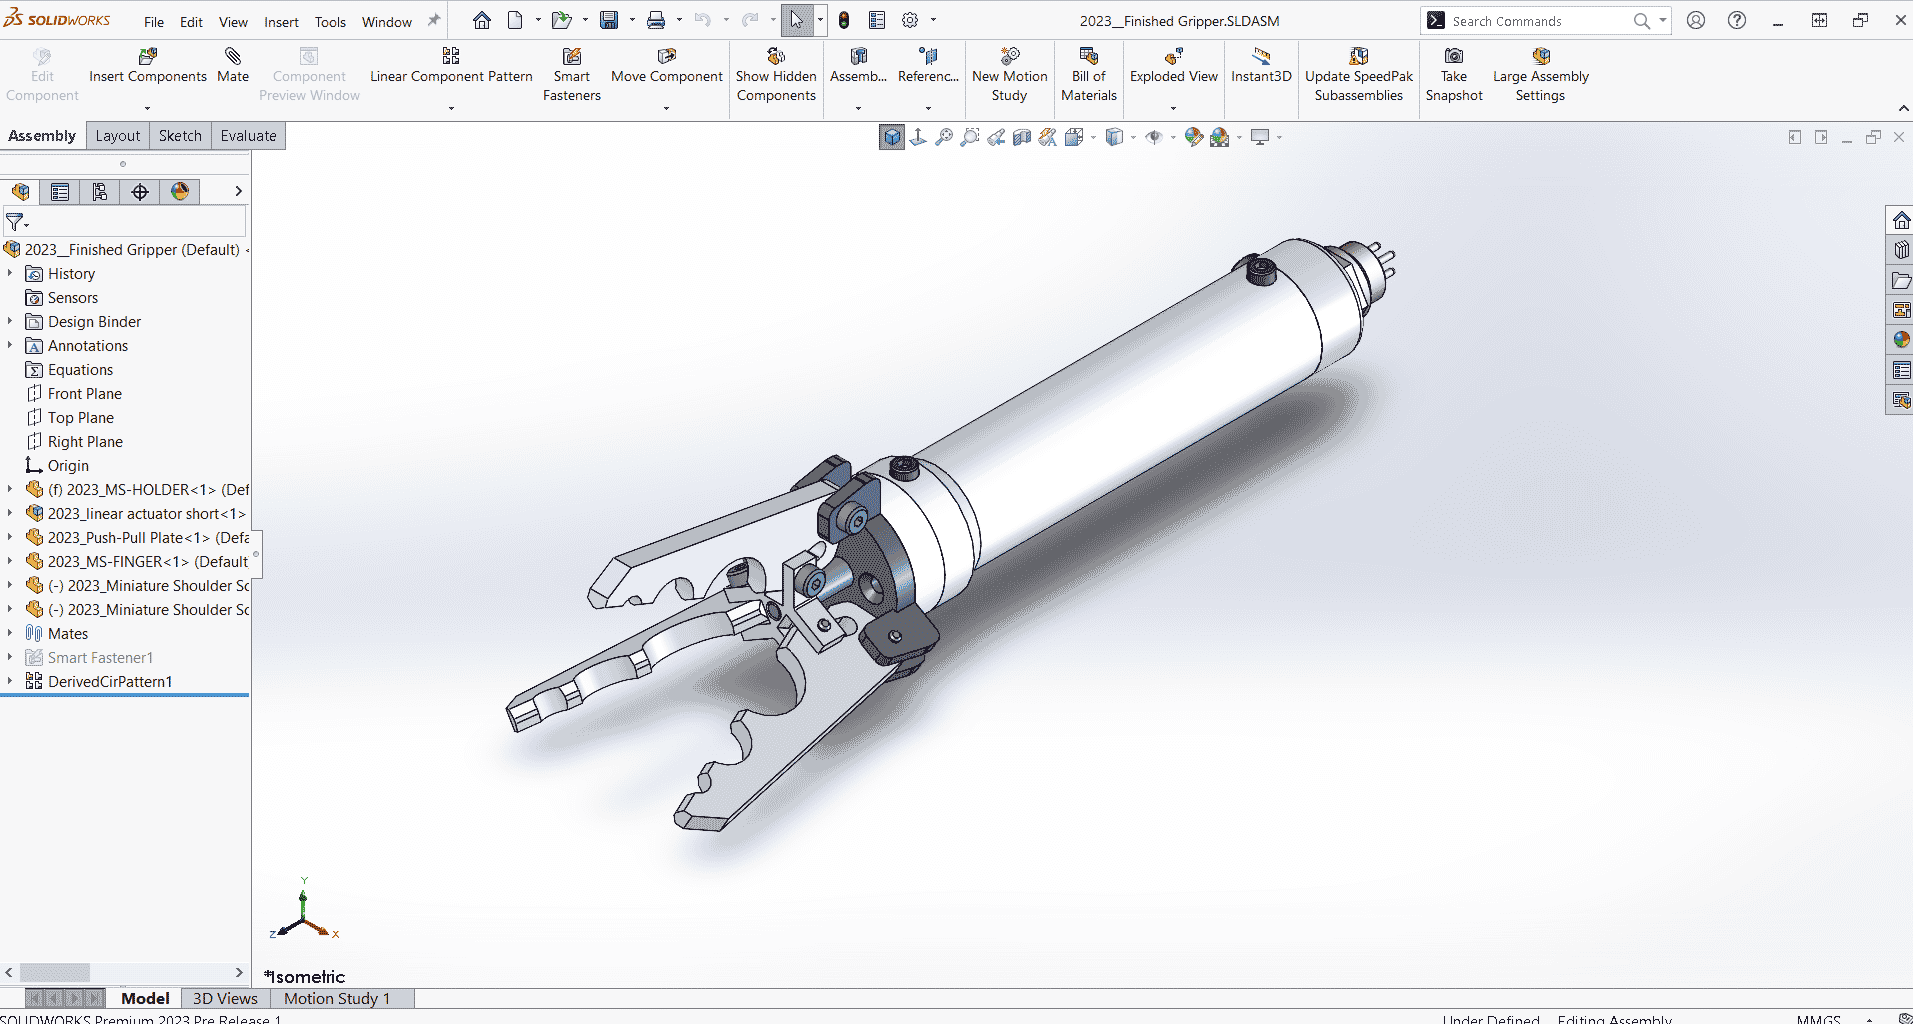 An assembly file in SOLIDWORKS 2023.